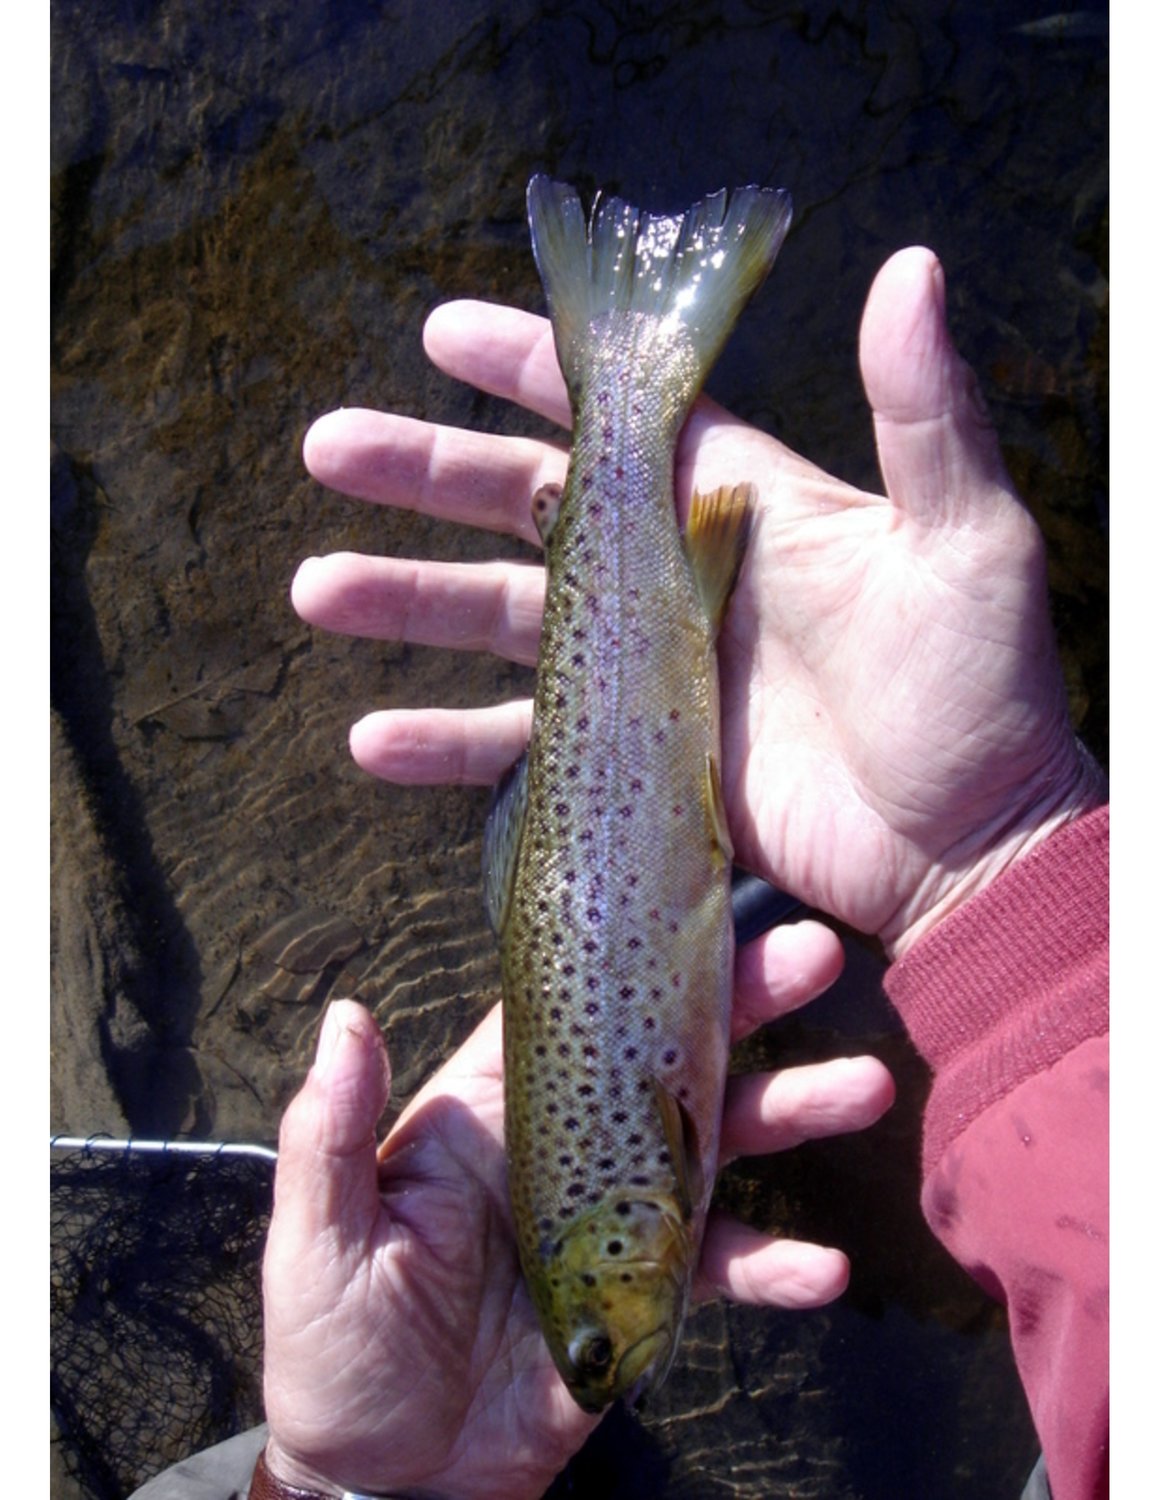 A slow-growing brown trout, like those we found during surveys of the Amawalk.